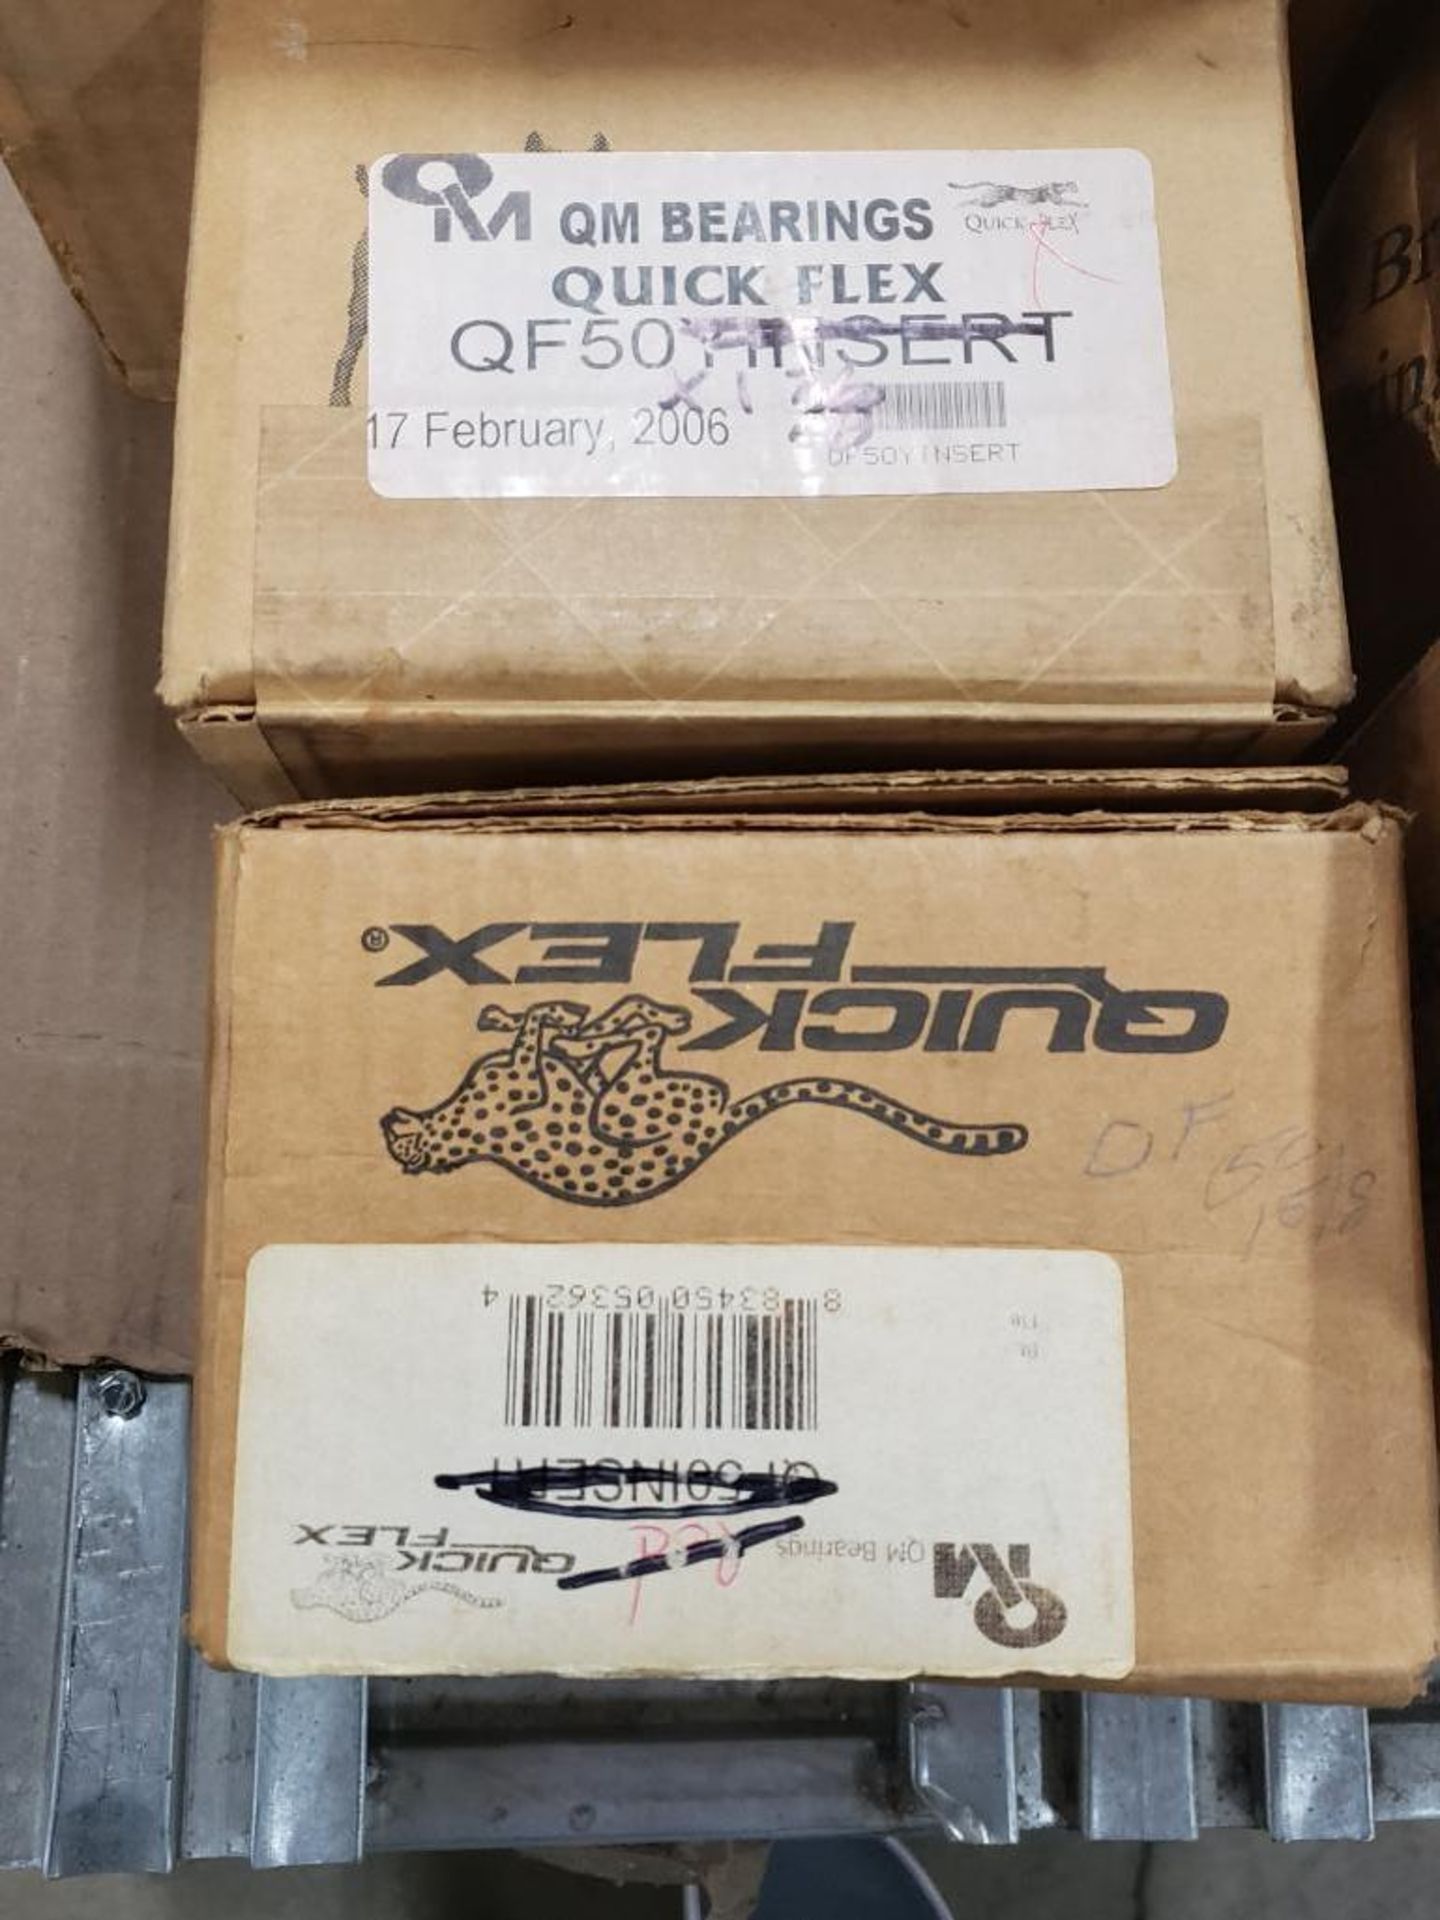 Qty 6 - Assorted QM bearing brand quick flex parts. New in box. - Image 2 of 7